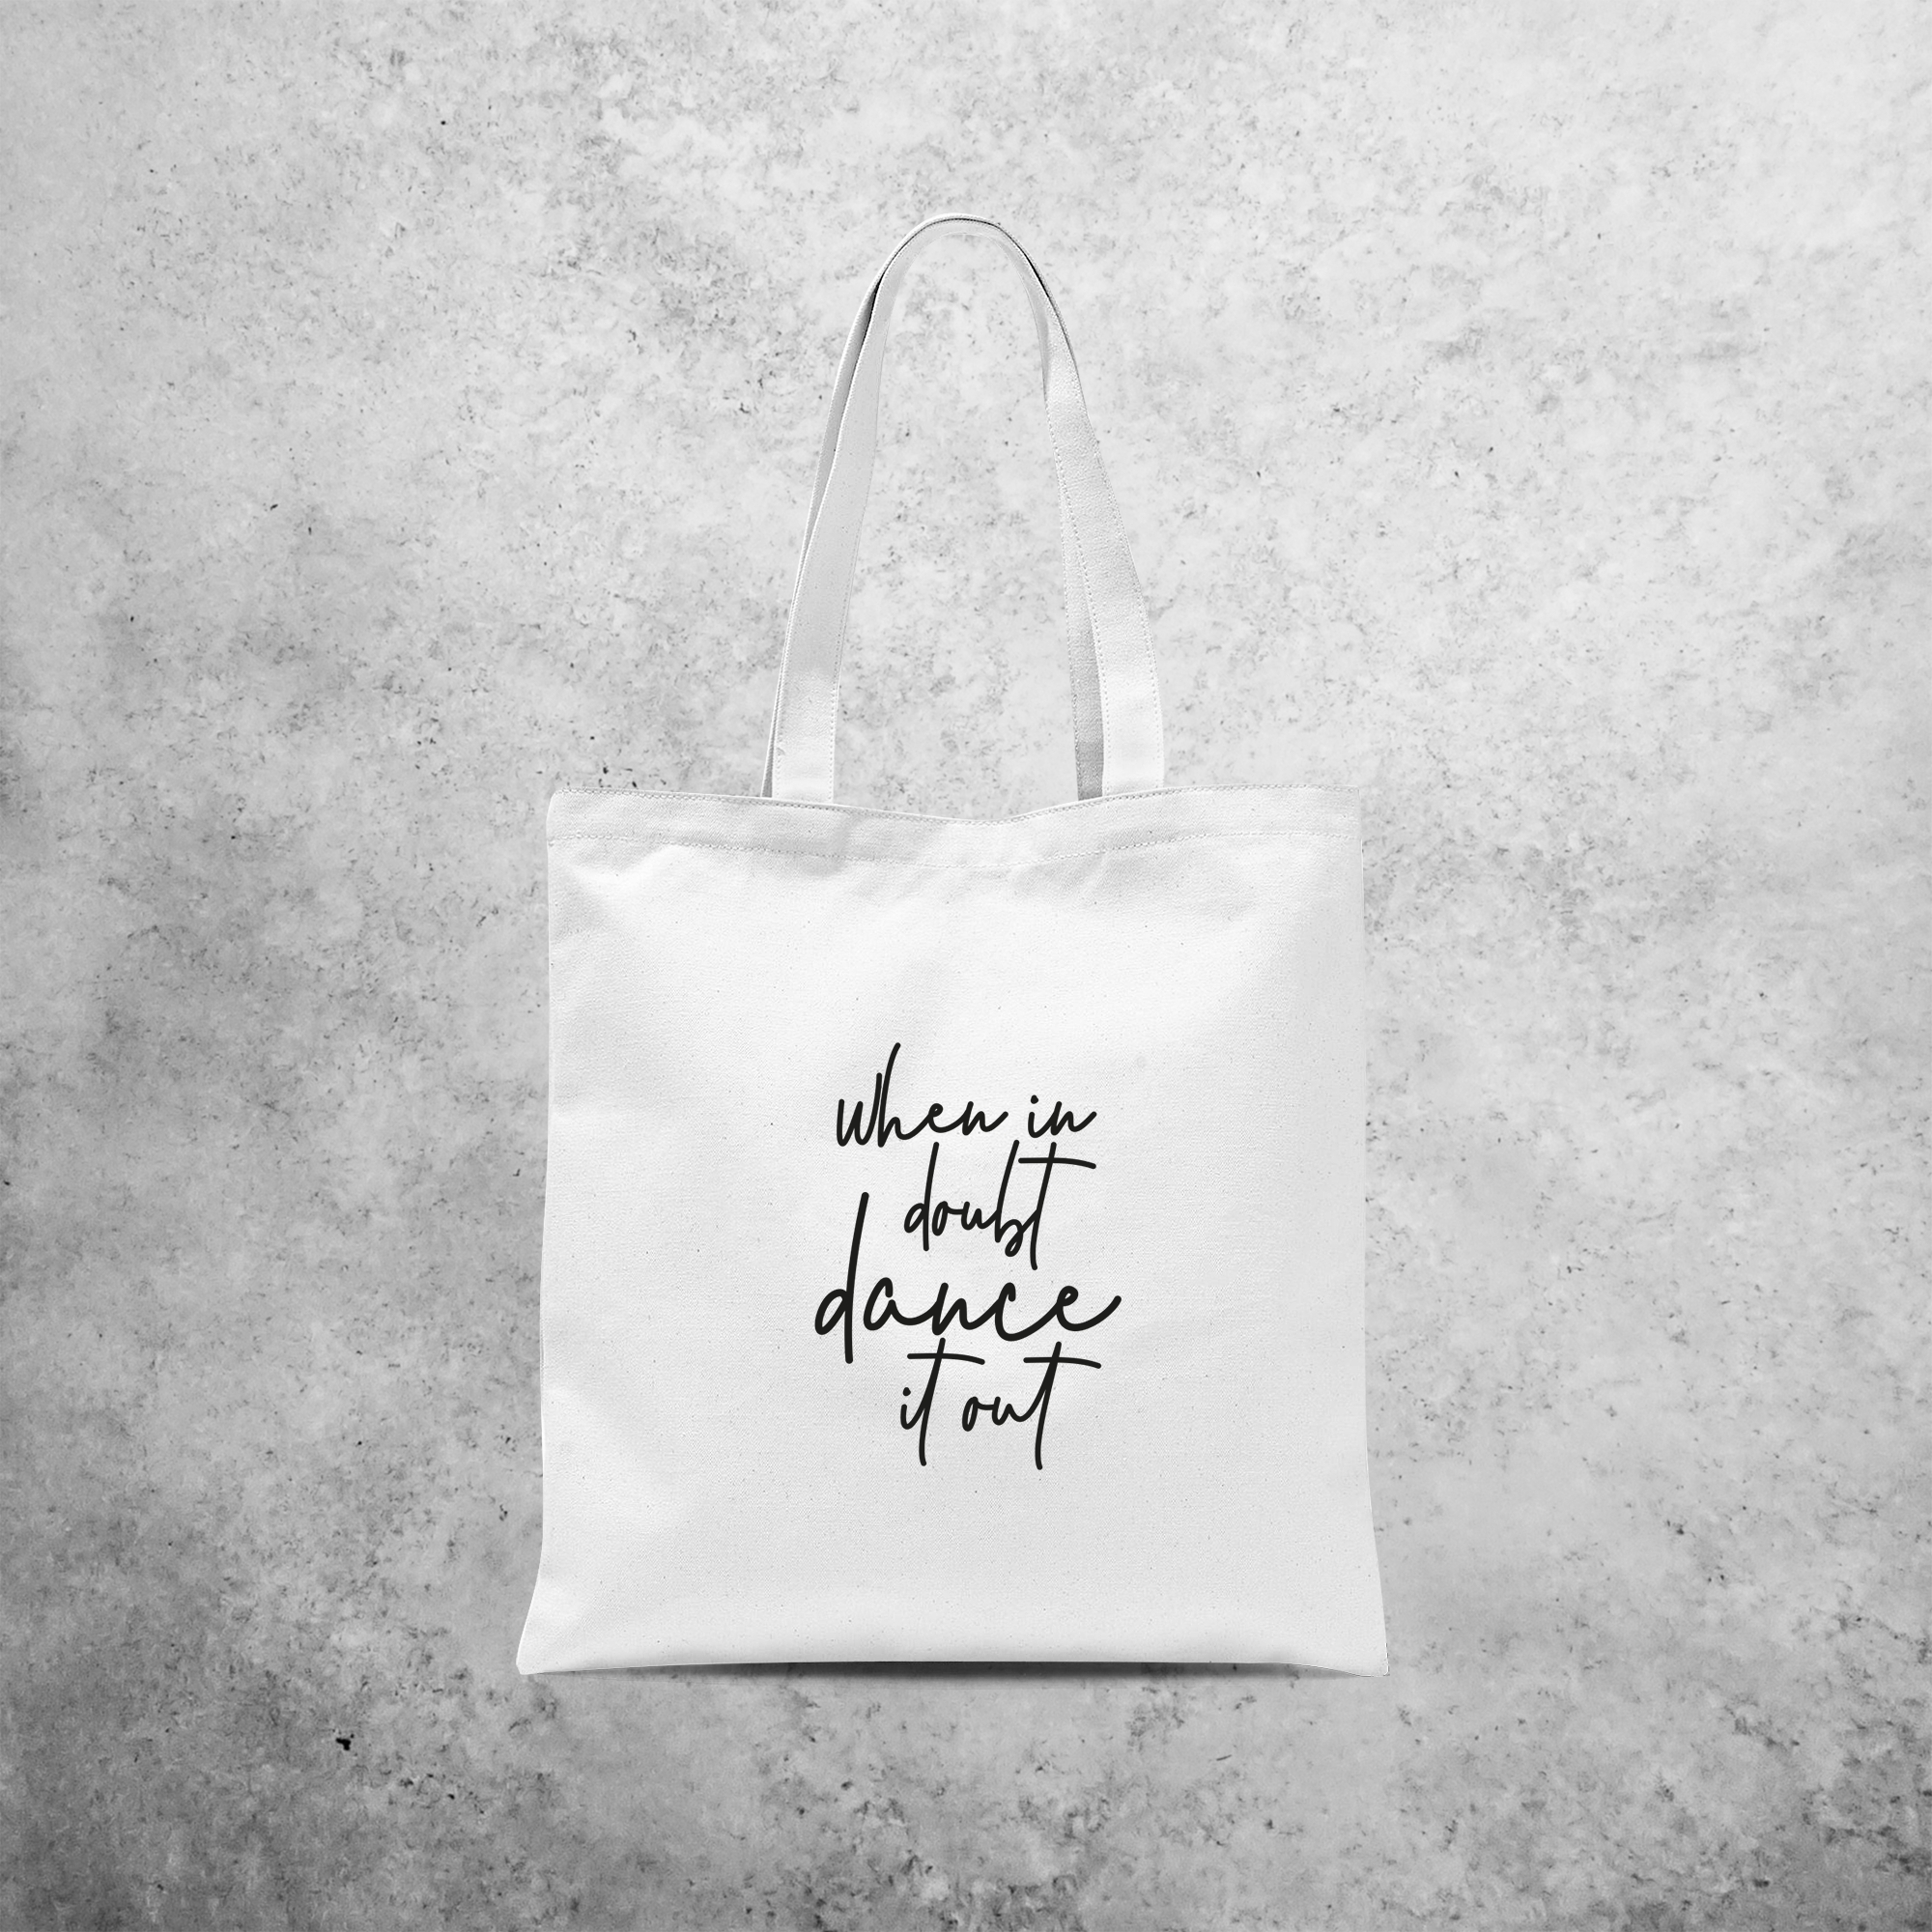 'When in doubt, dance it out' tote bag